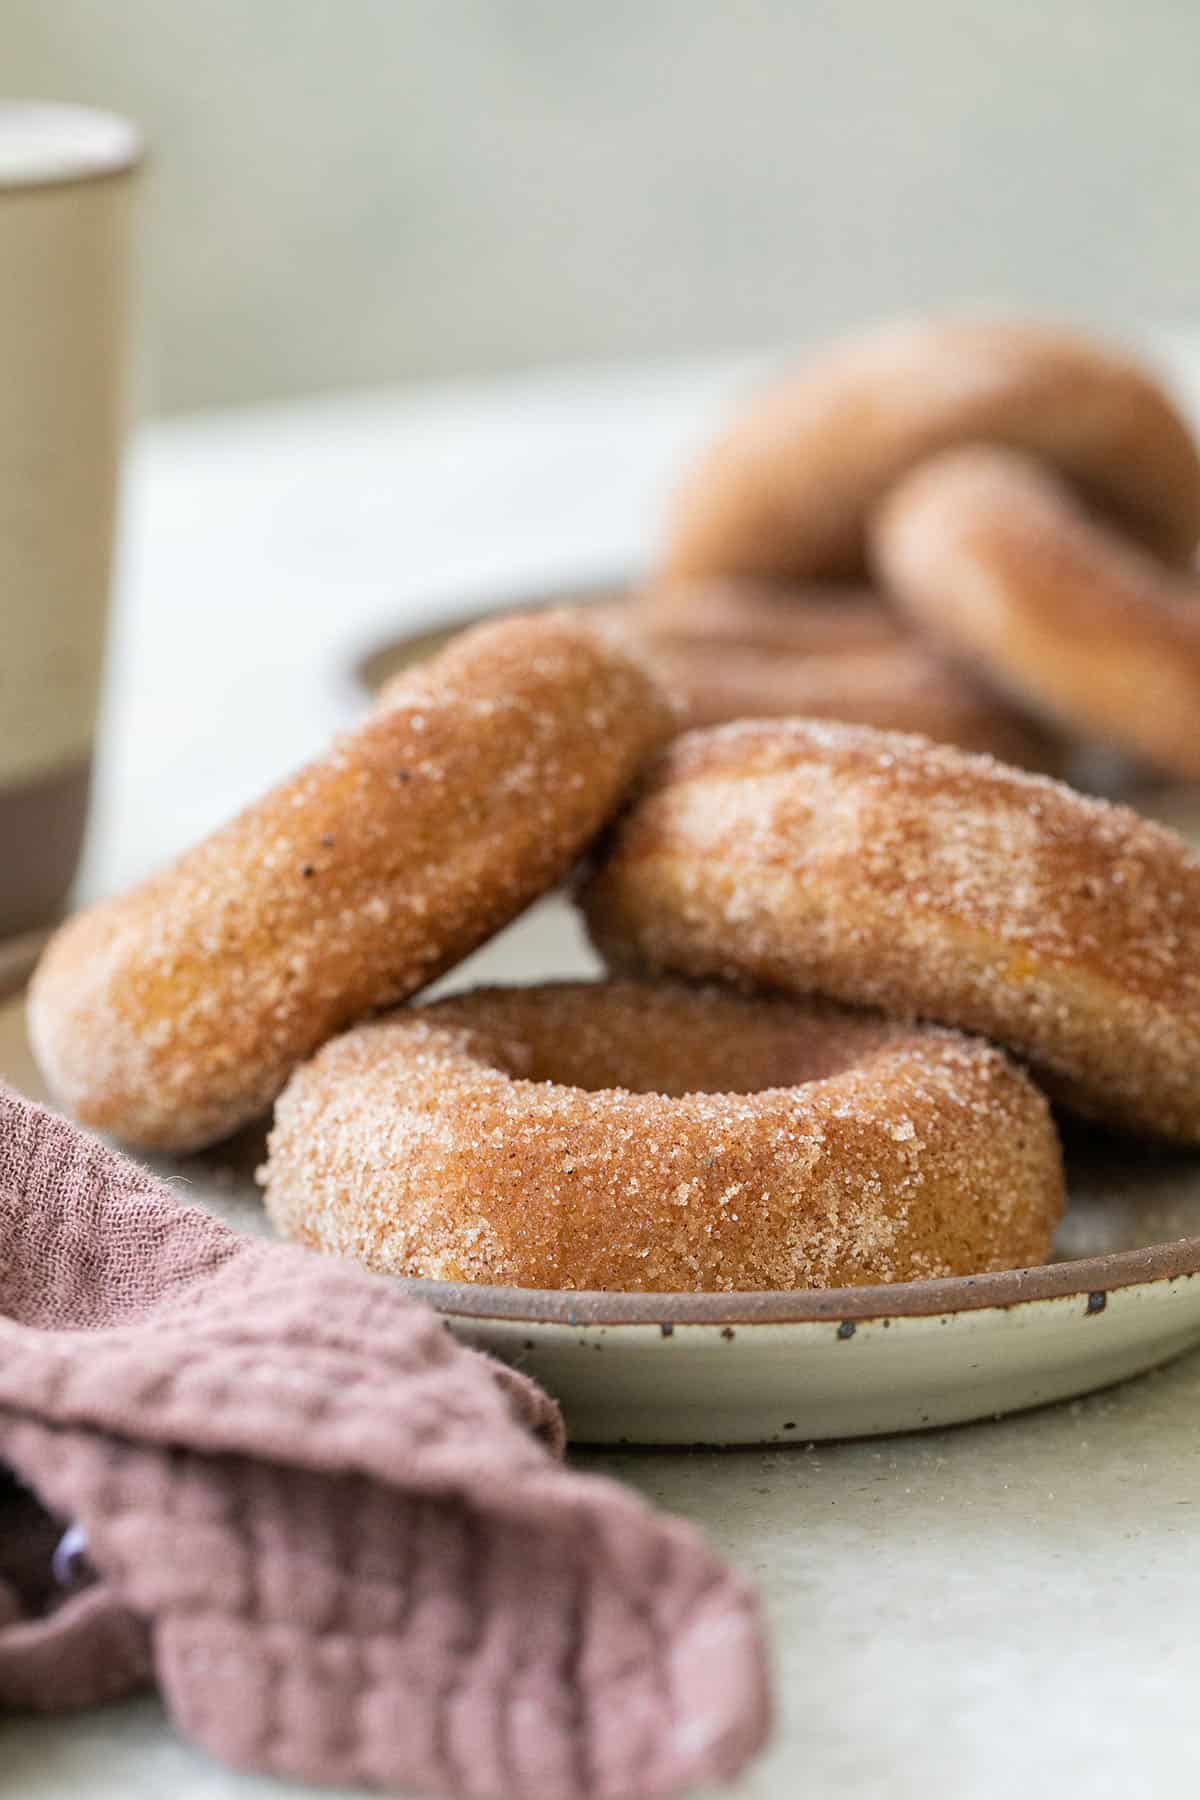 Apple cider donuts on a plate.